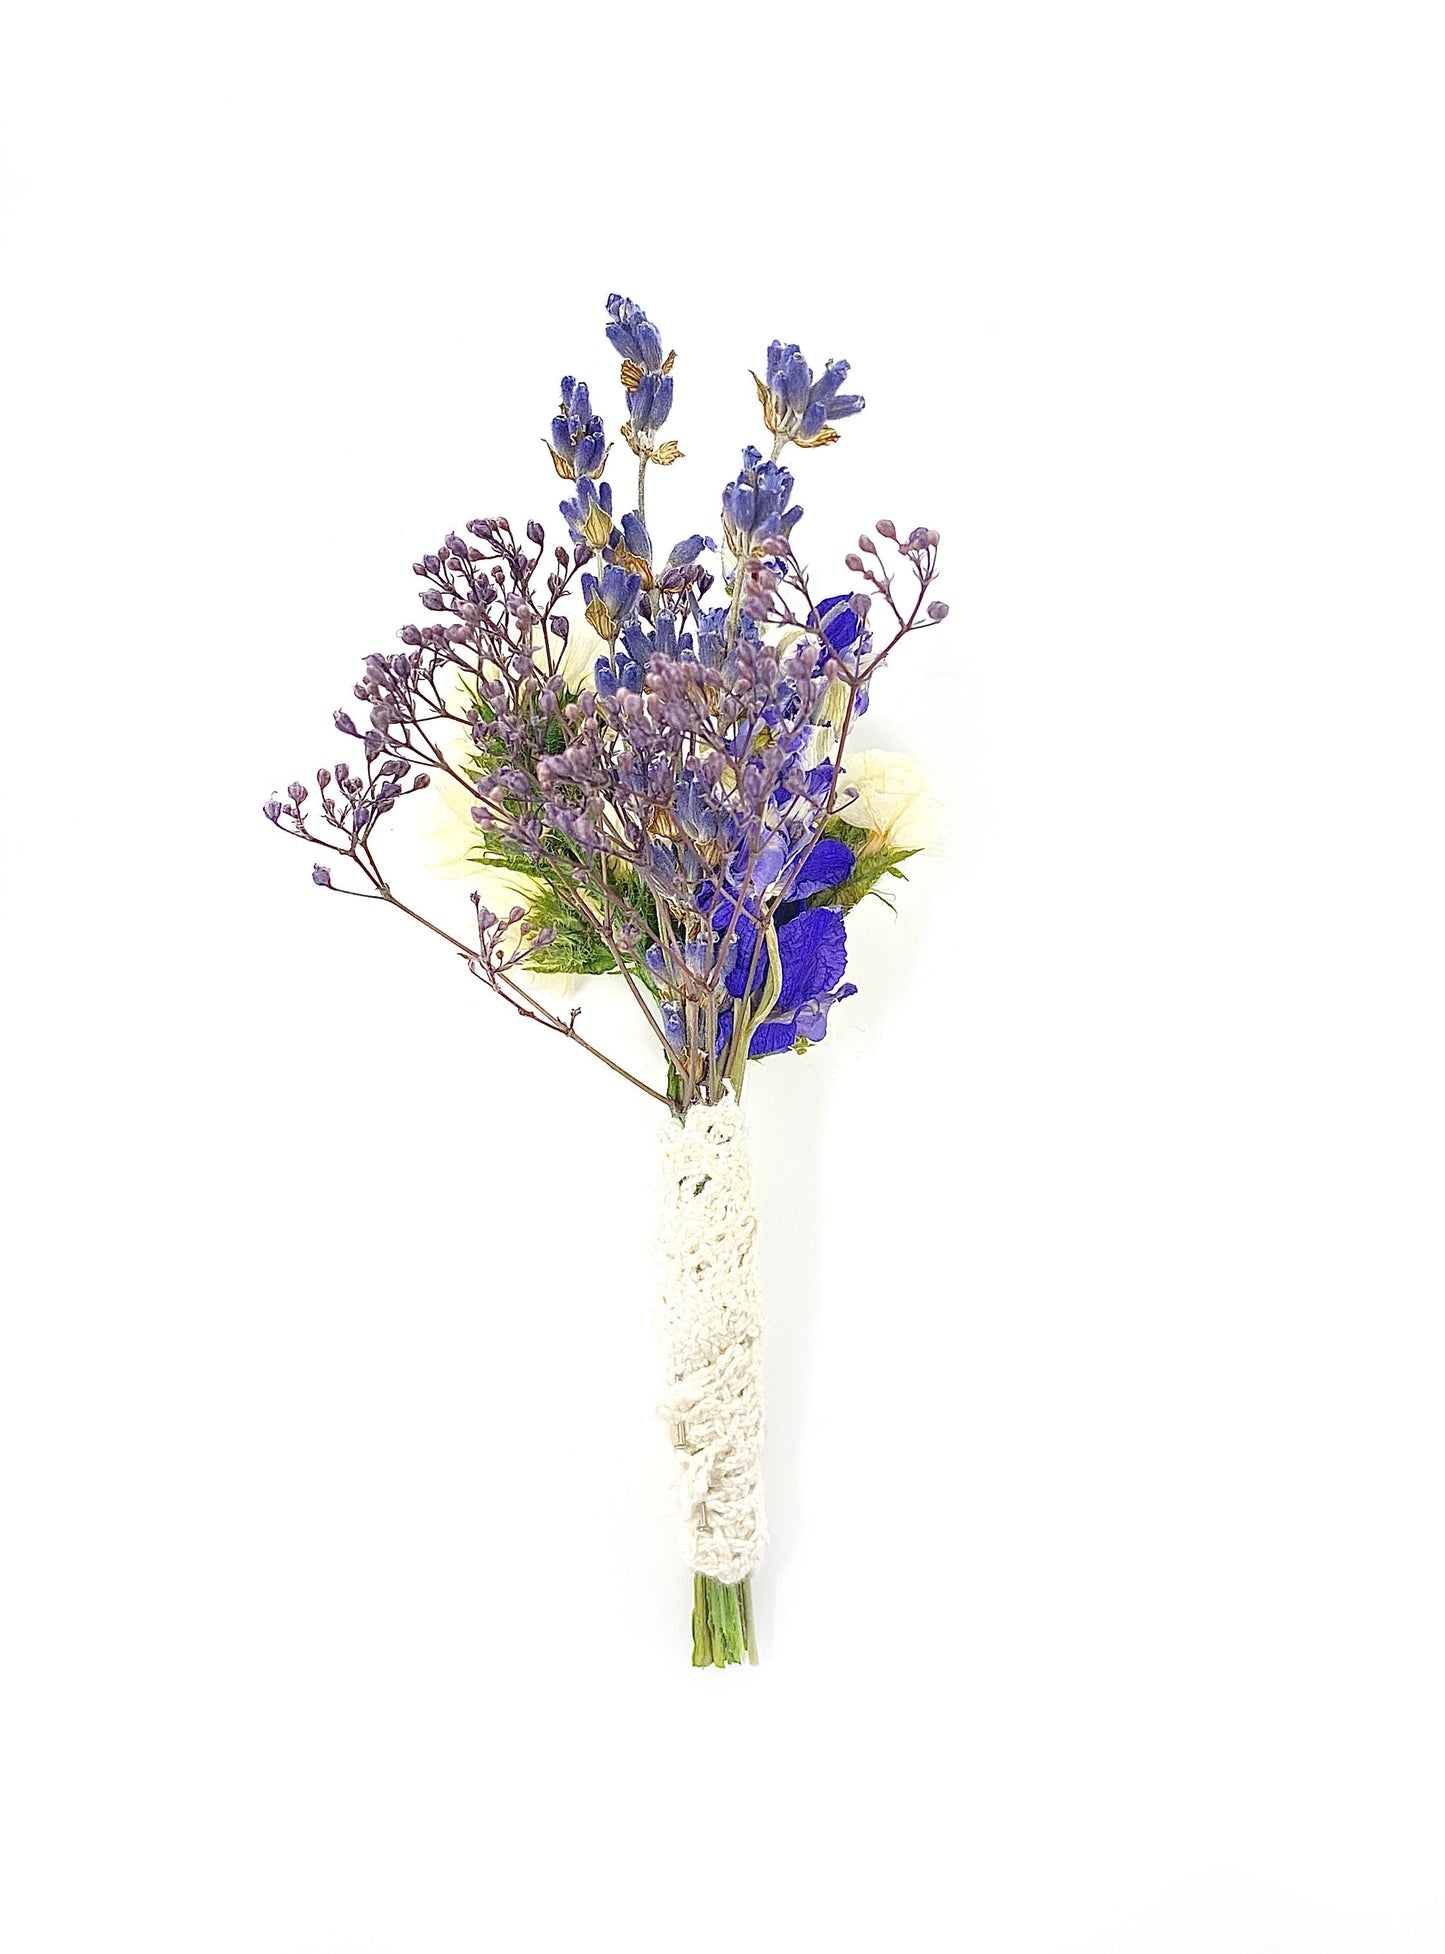 Boutonniere, Dried Flowers, Wedding Accessories, Preserved Floral, Bridal, Lavender, Decor, Purple and White,